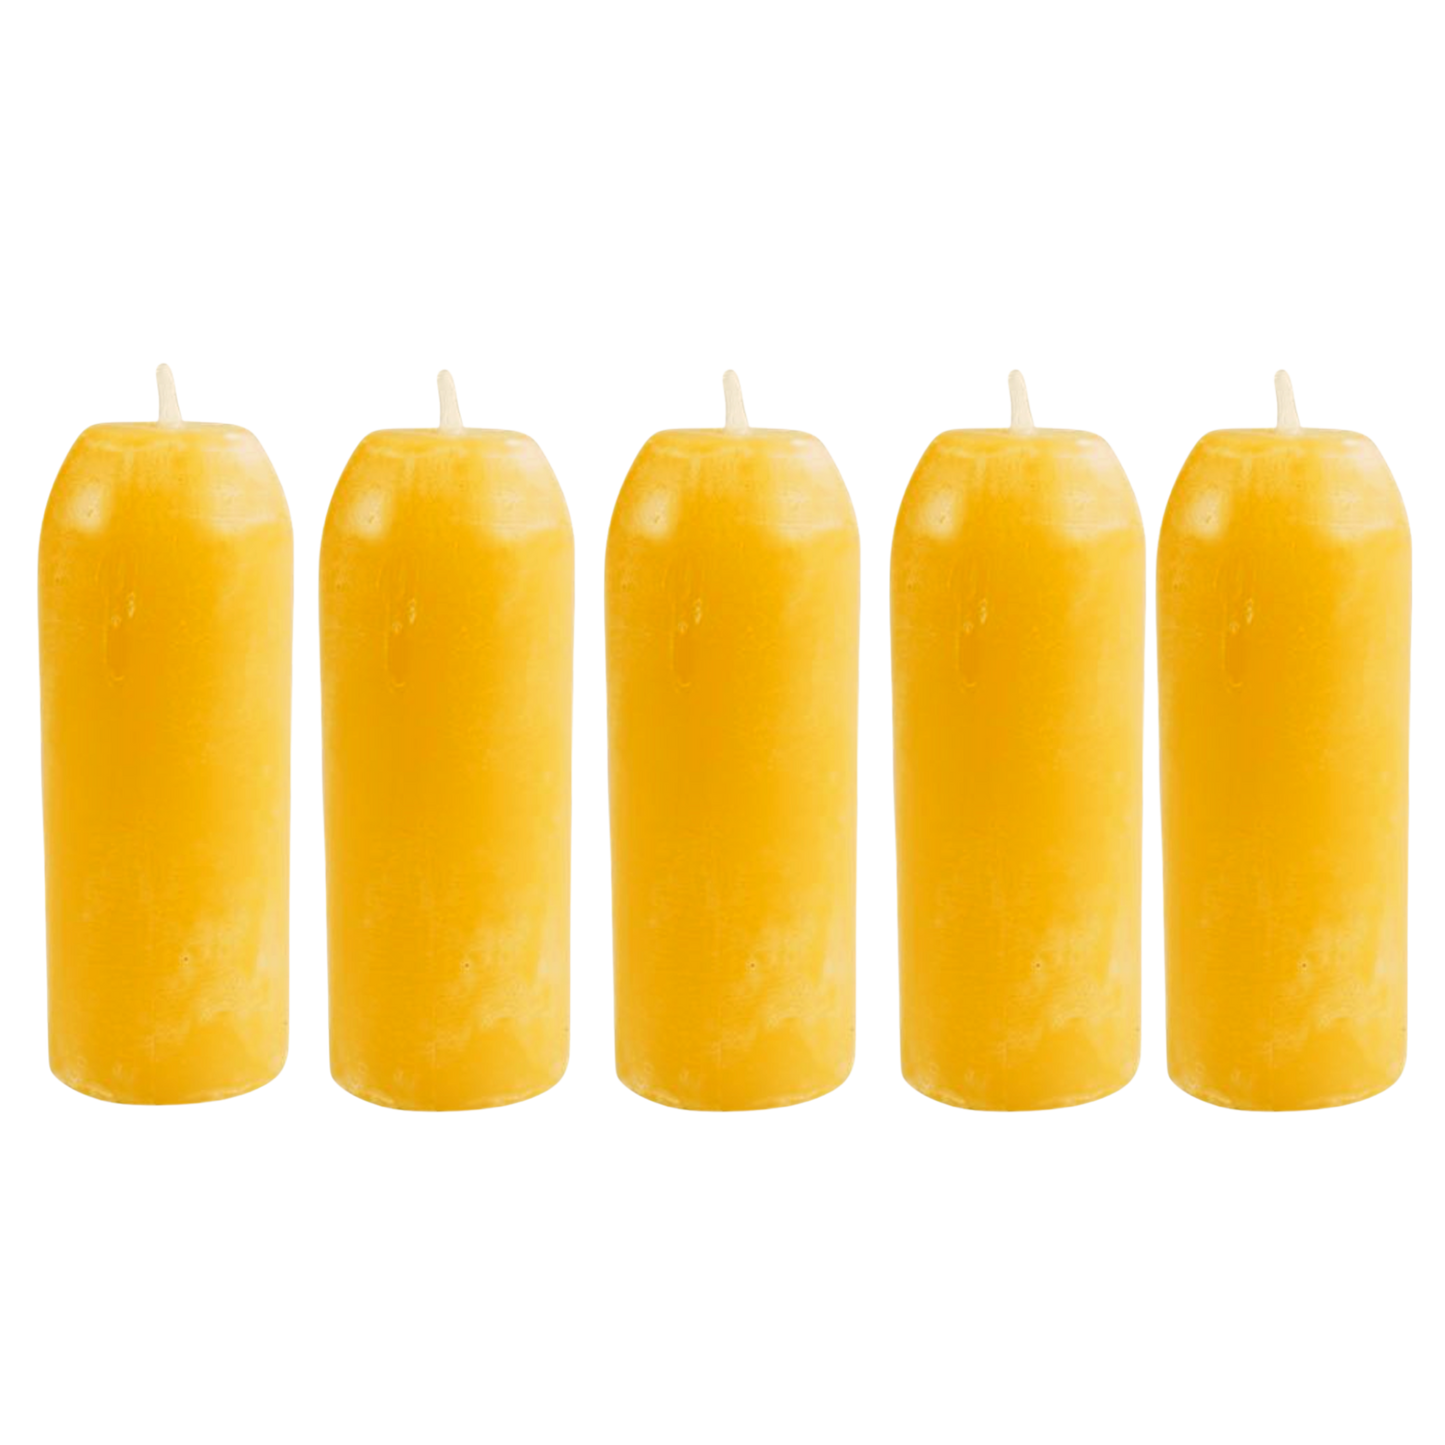 UCO Beeswax Candles